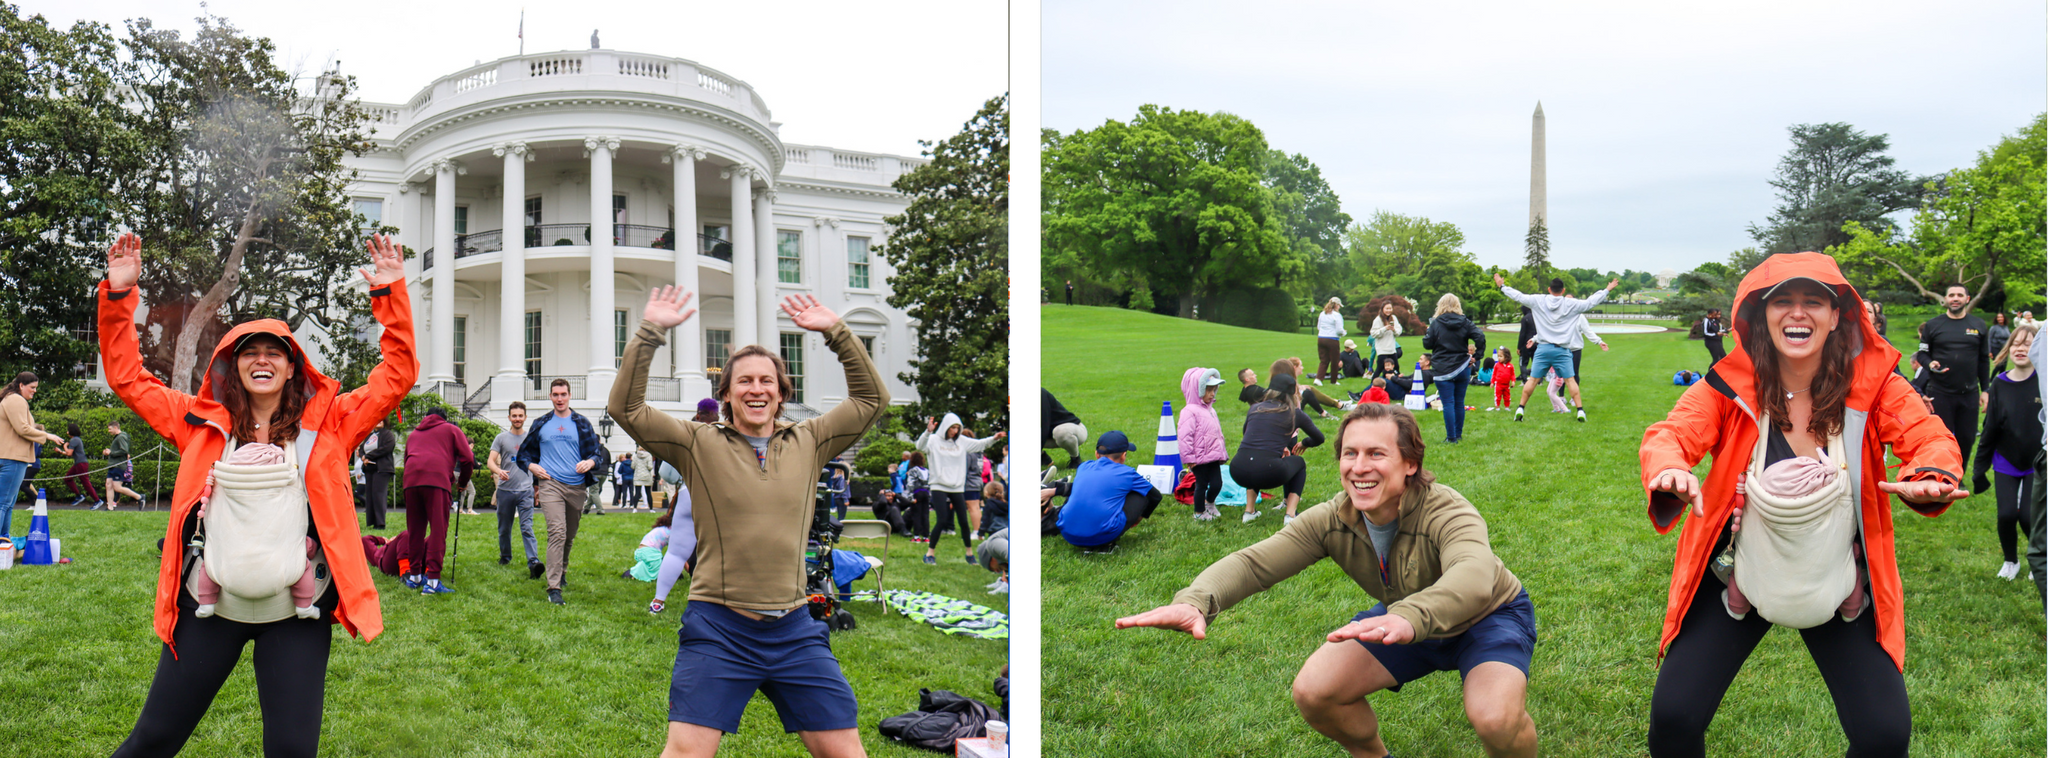 Compass Coffee team works out at the White House with cold brew coffee